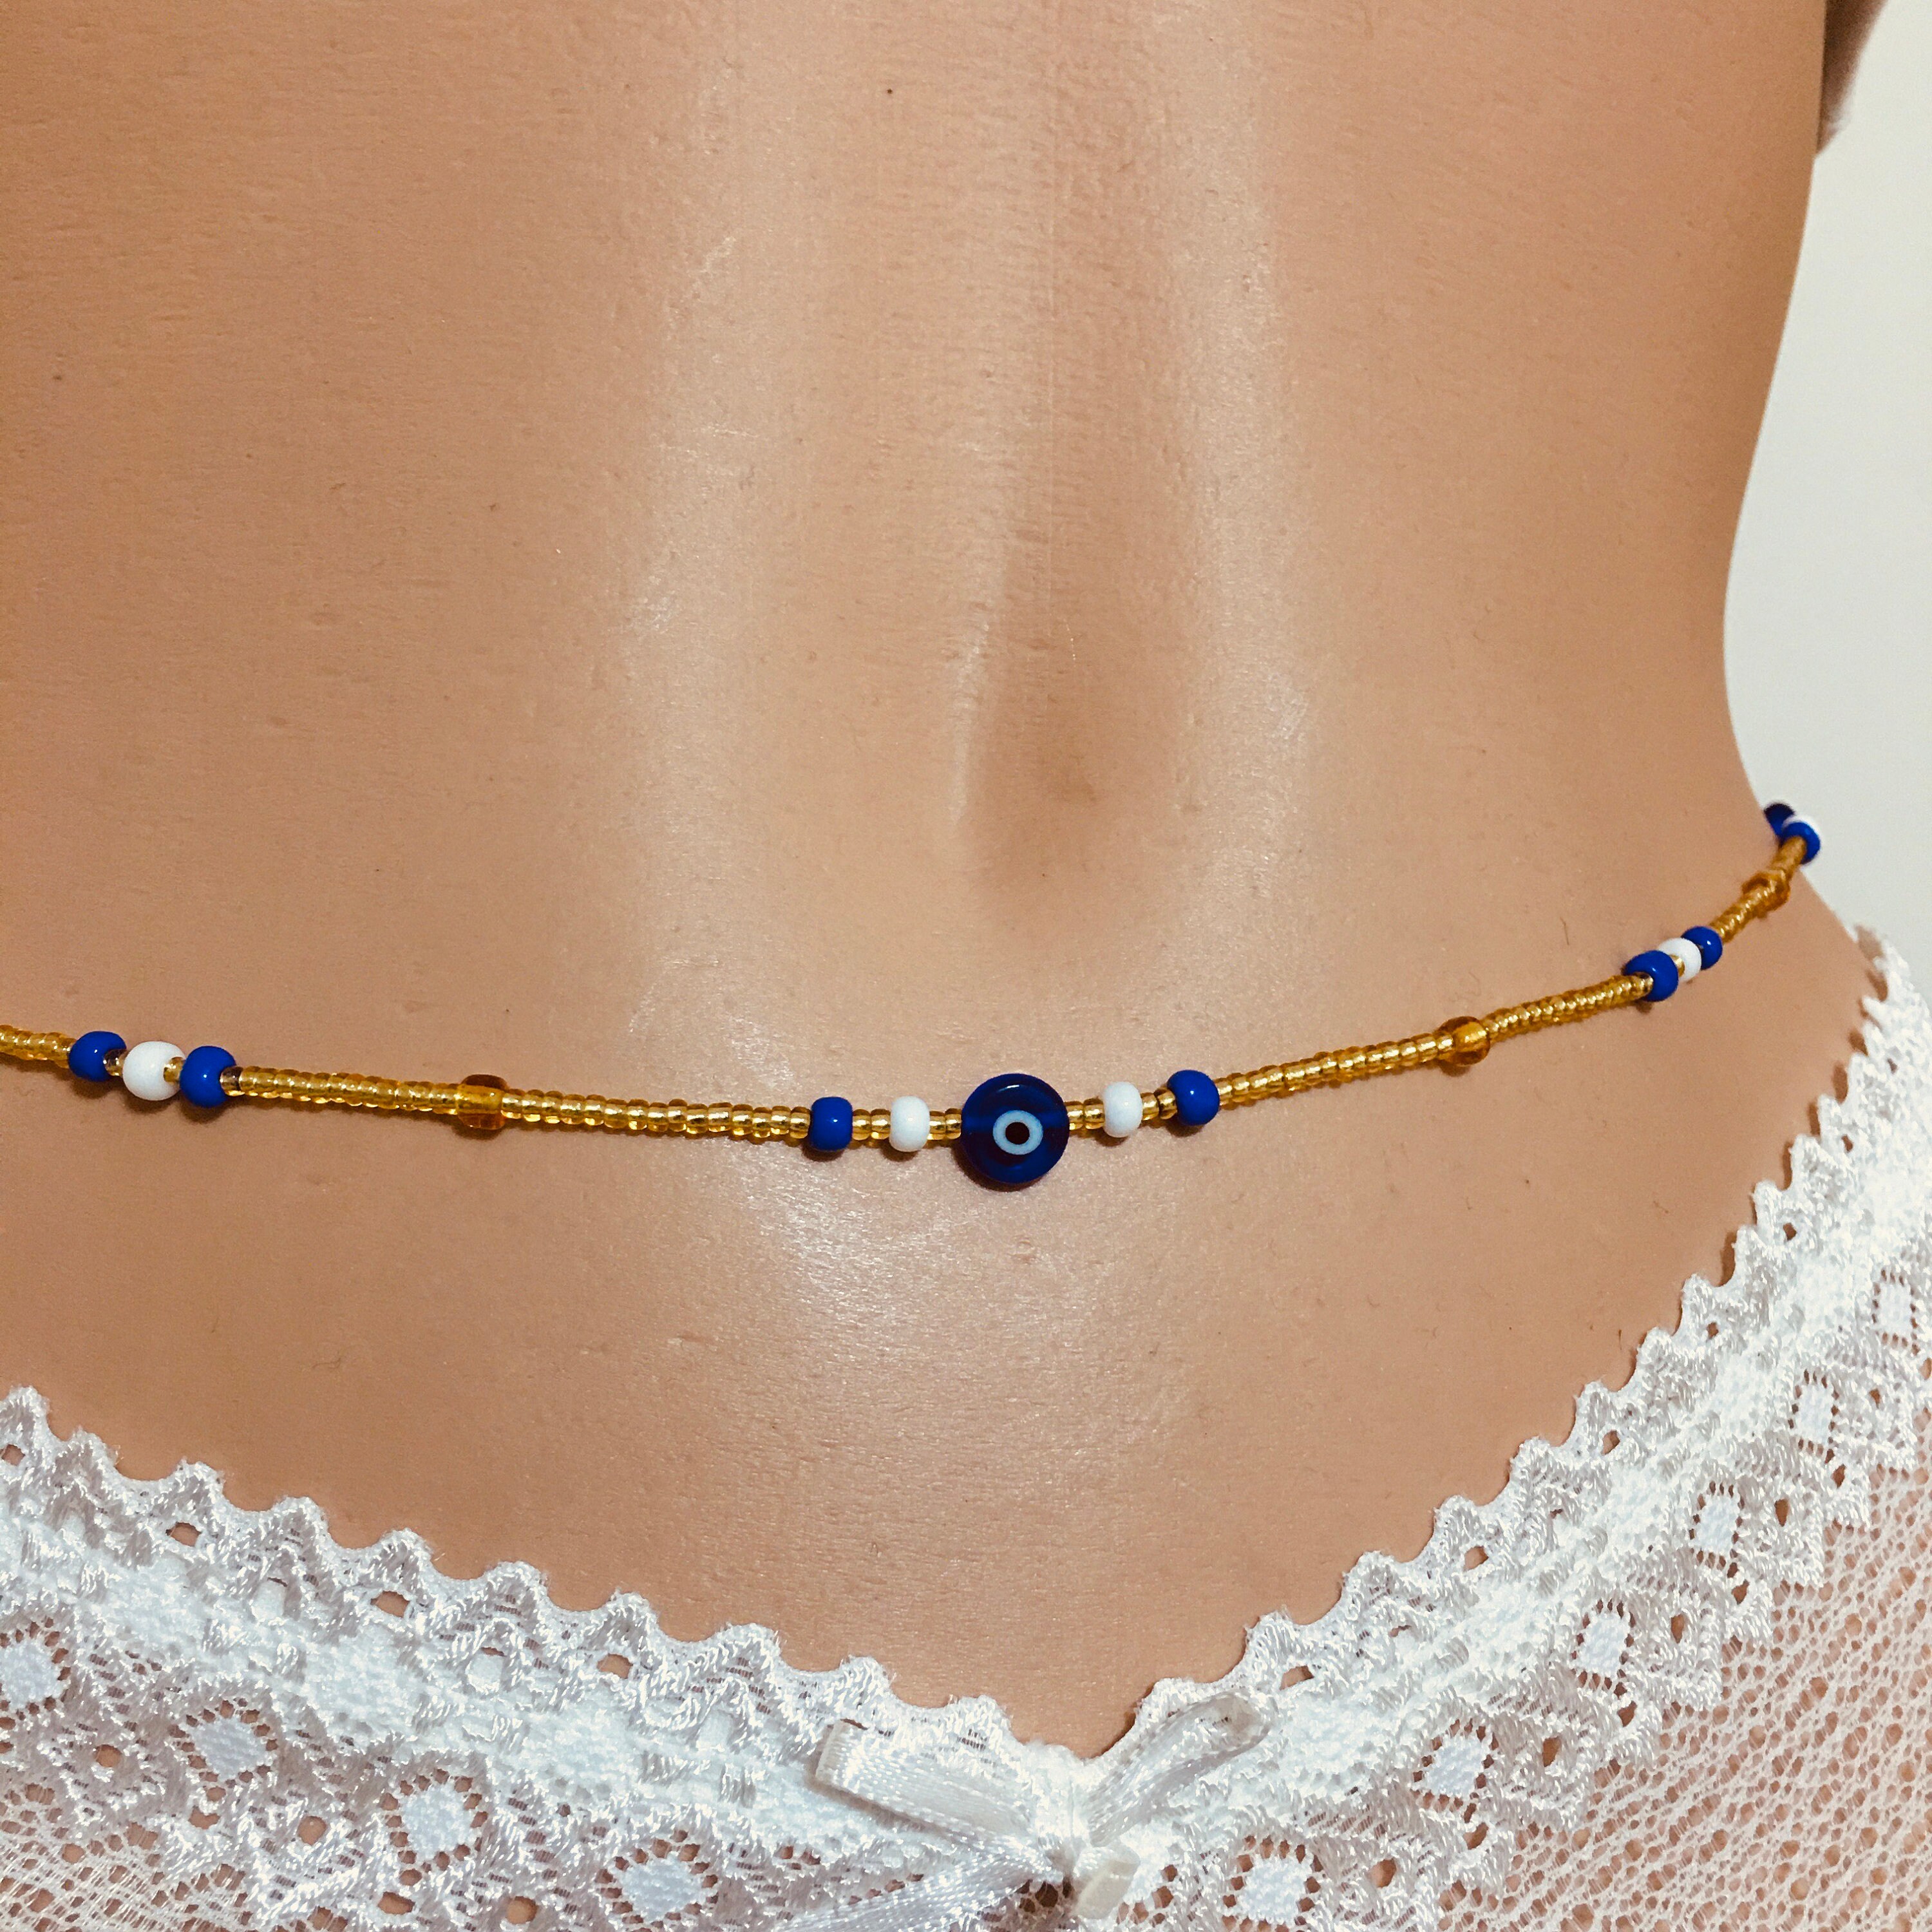 Tie on Waist Beads, 25-60 Inches Belly Bead, Evil Eye Belly Chains